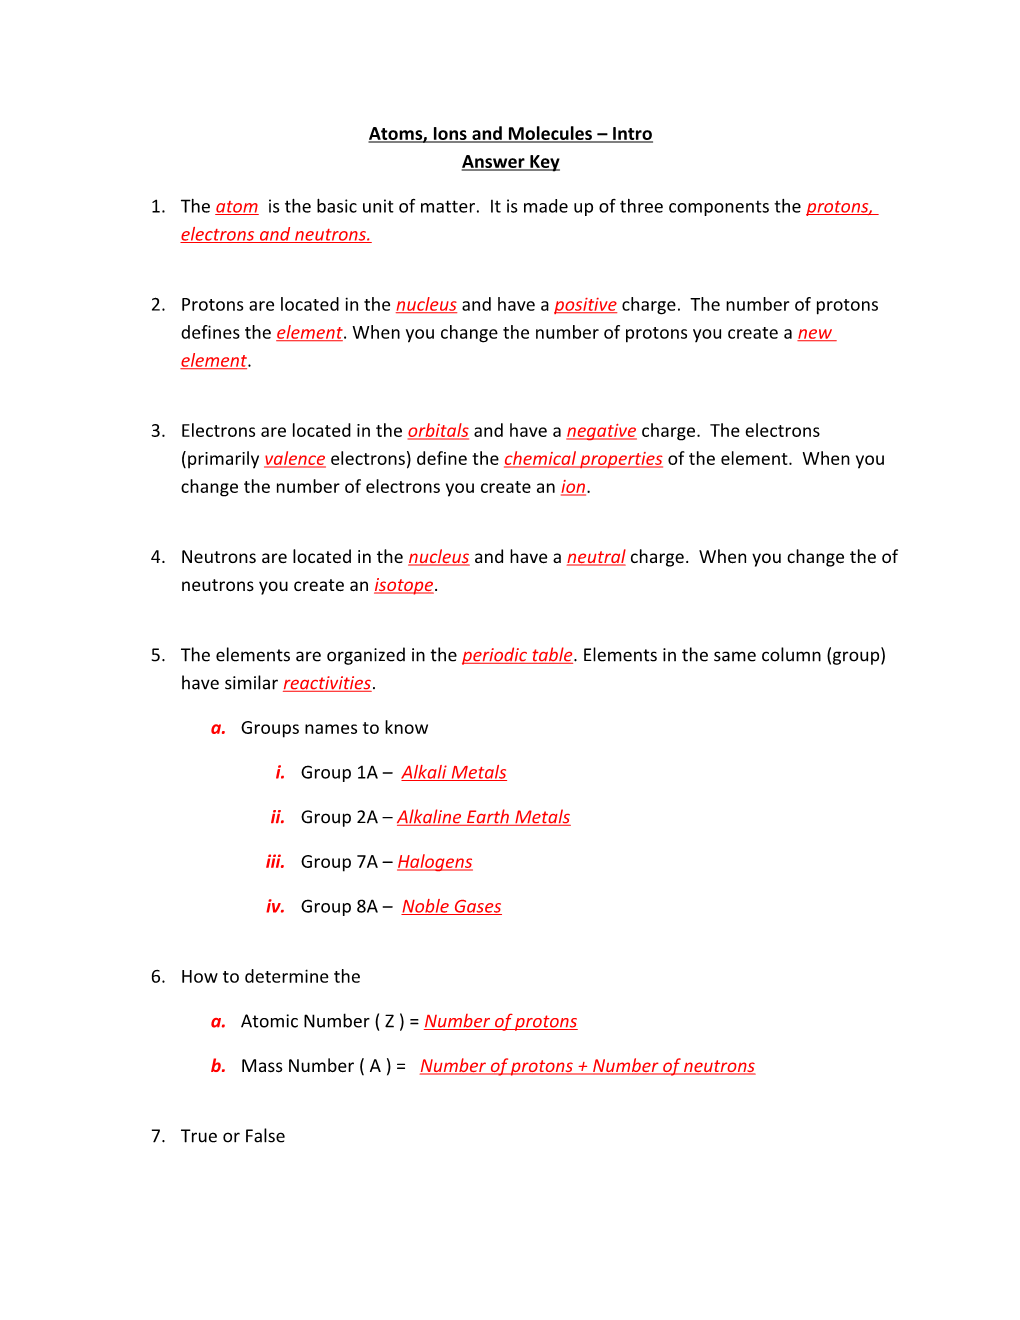 Atoms, Ions and Molecules Intro Answer Key